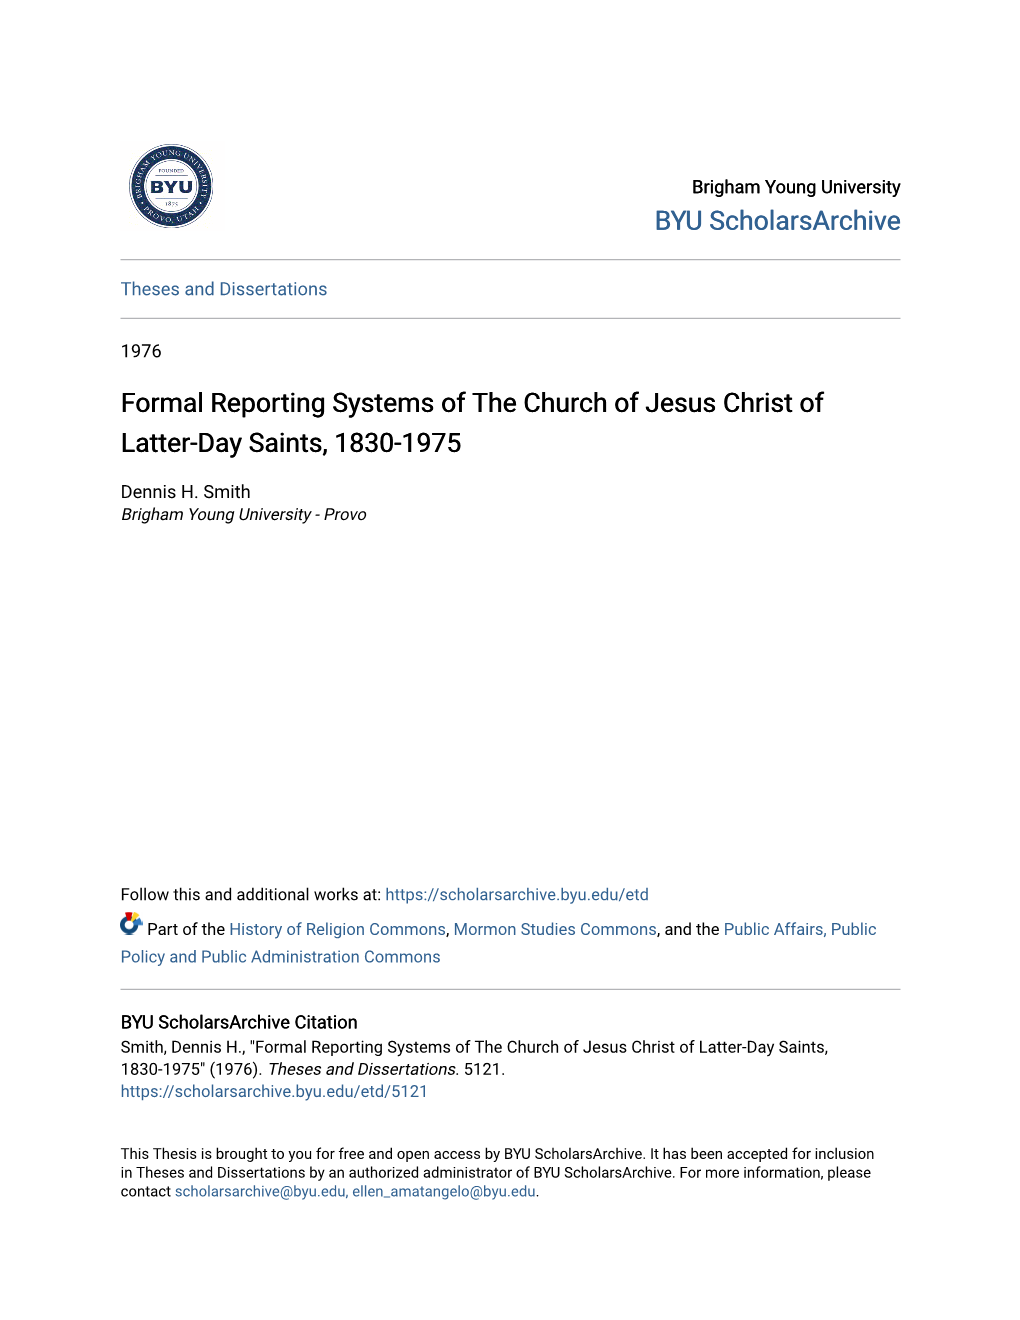 Formal Reporting Systems of the Church of Jesus Christ of Latter-Day Saints, 1830-1975